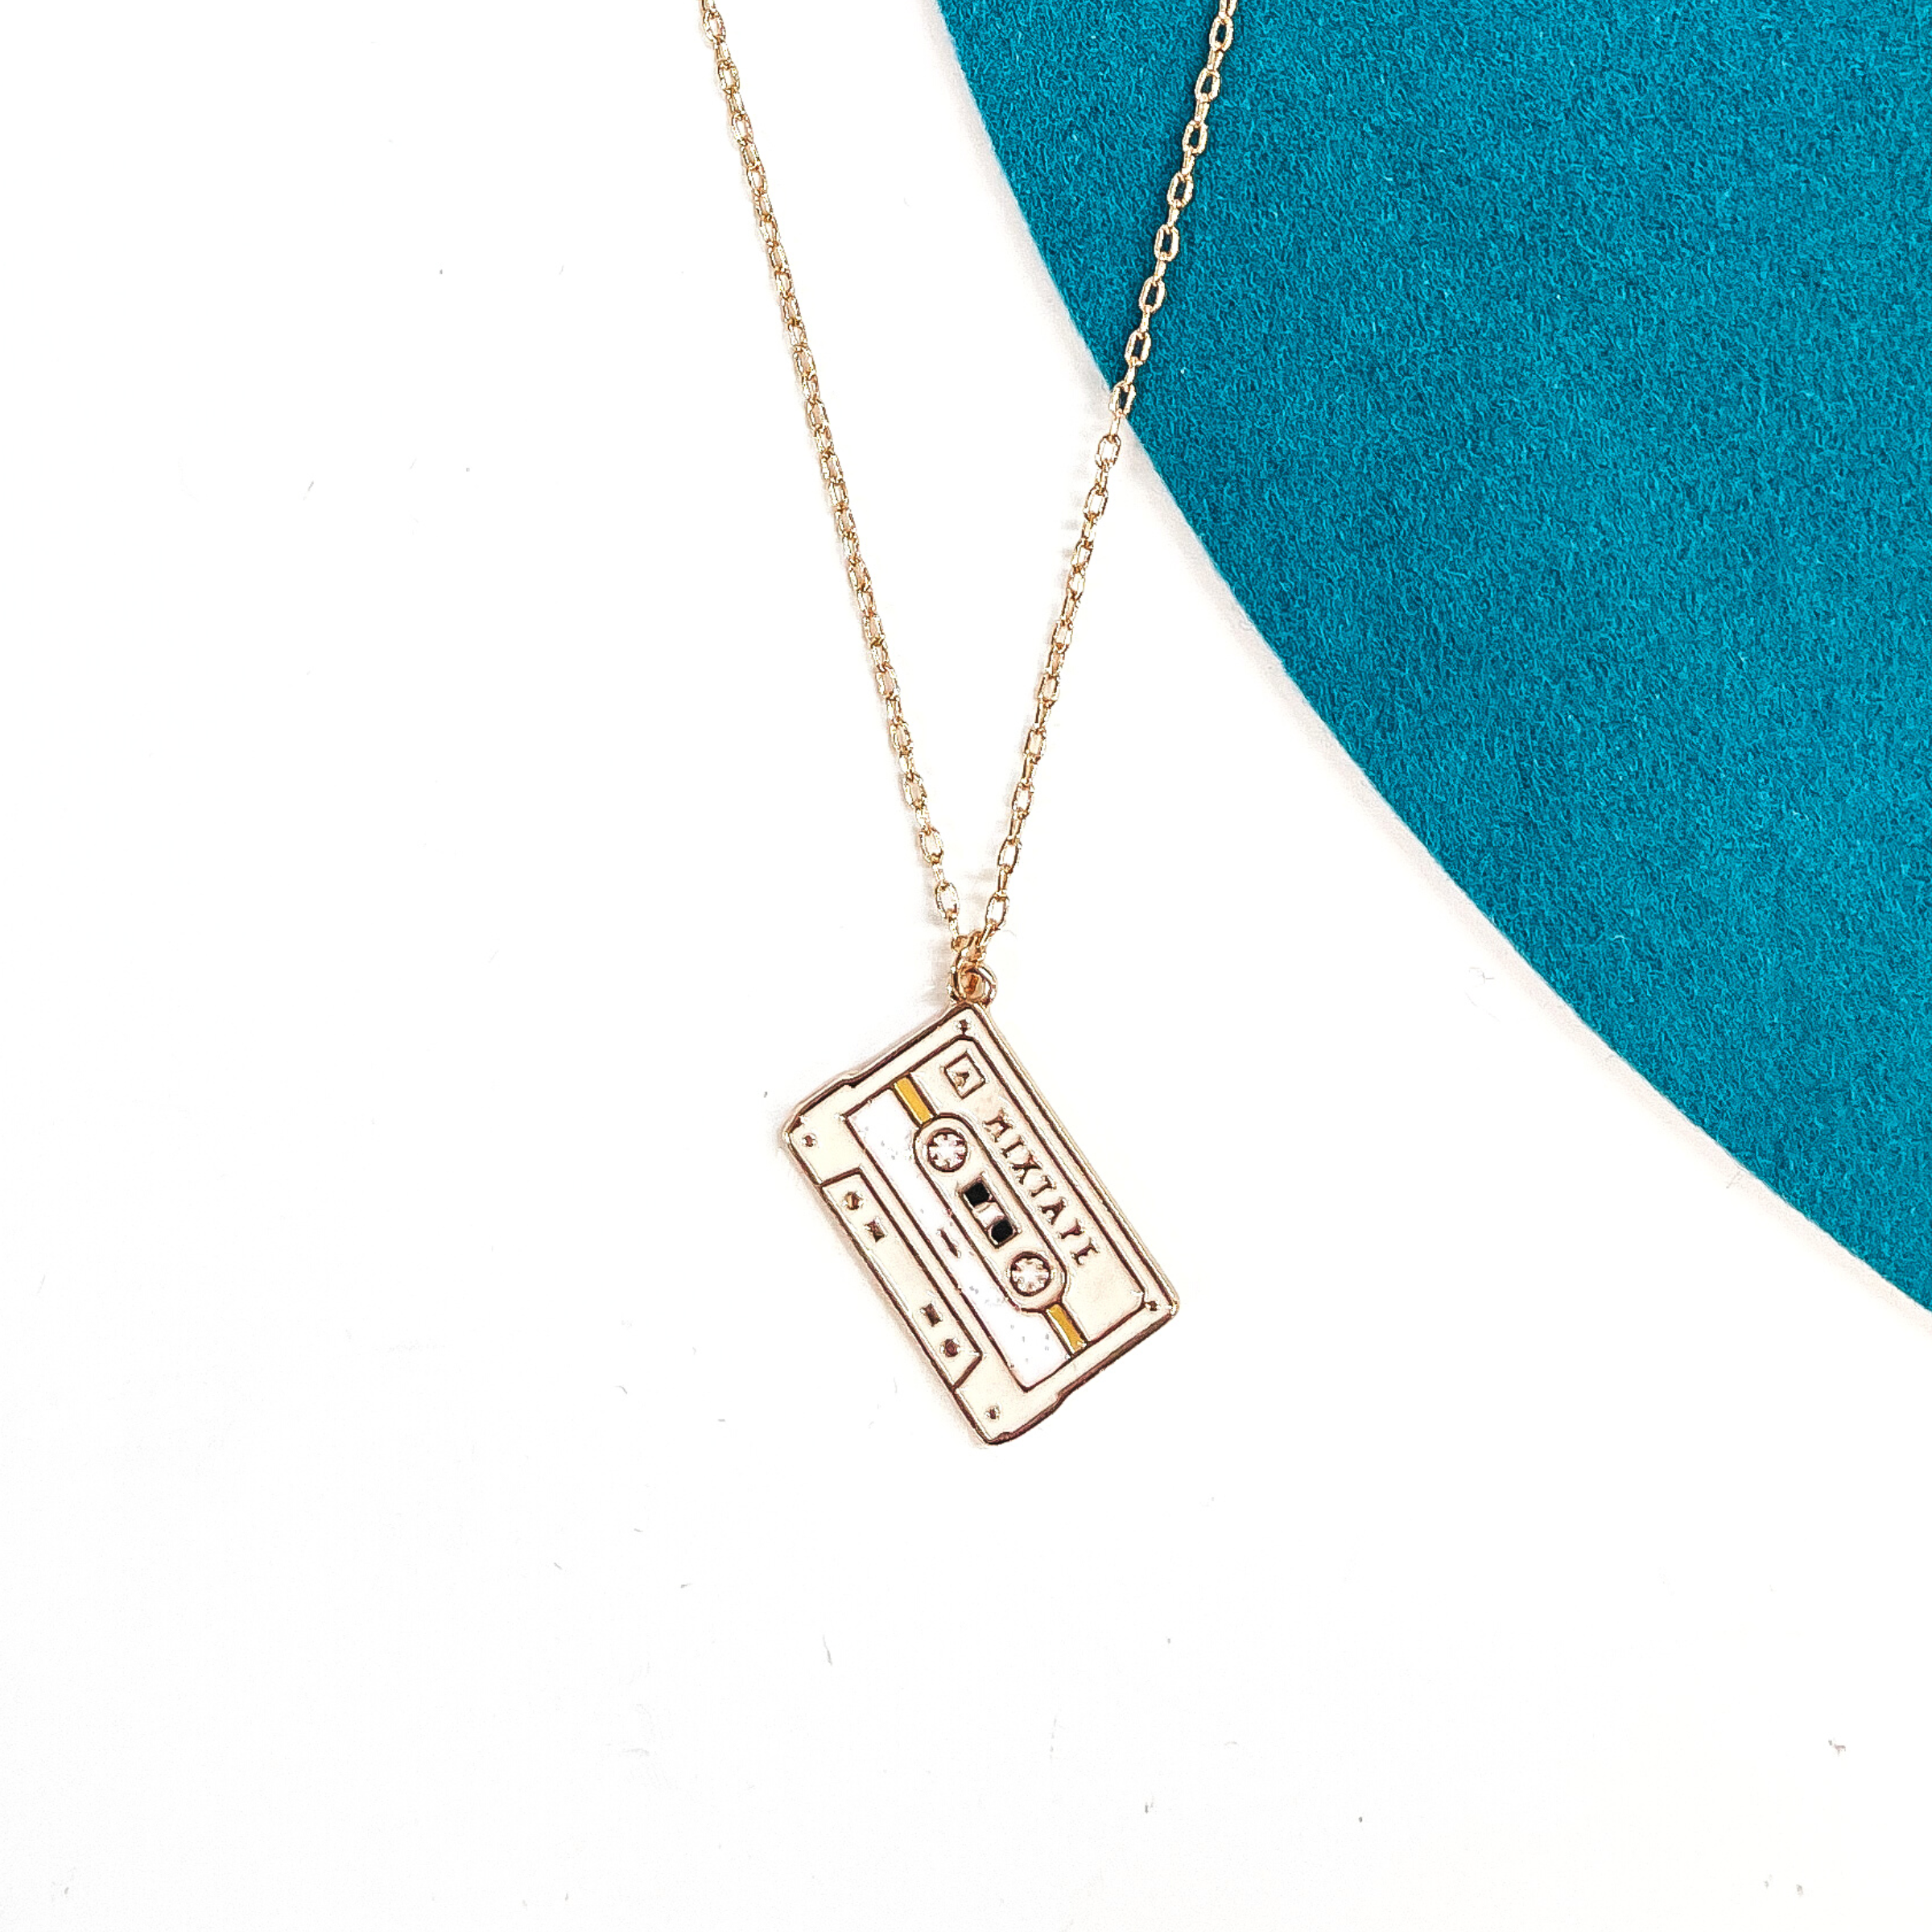 Gold thin chain necklace with an ivory cassette tape pendant. The cassette pendant  has a bit of glitter in the center and other tones of white and tan. This necklace  is laying on a white background and a teal felt hat brim.